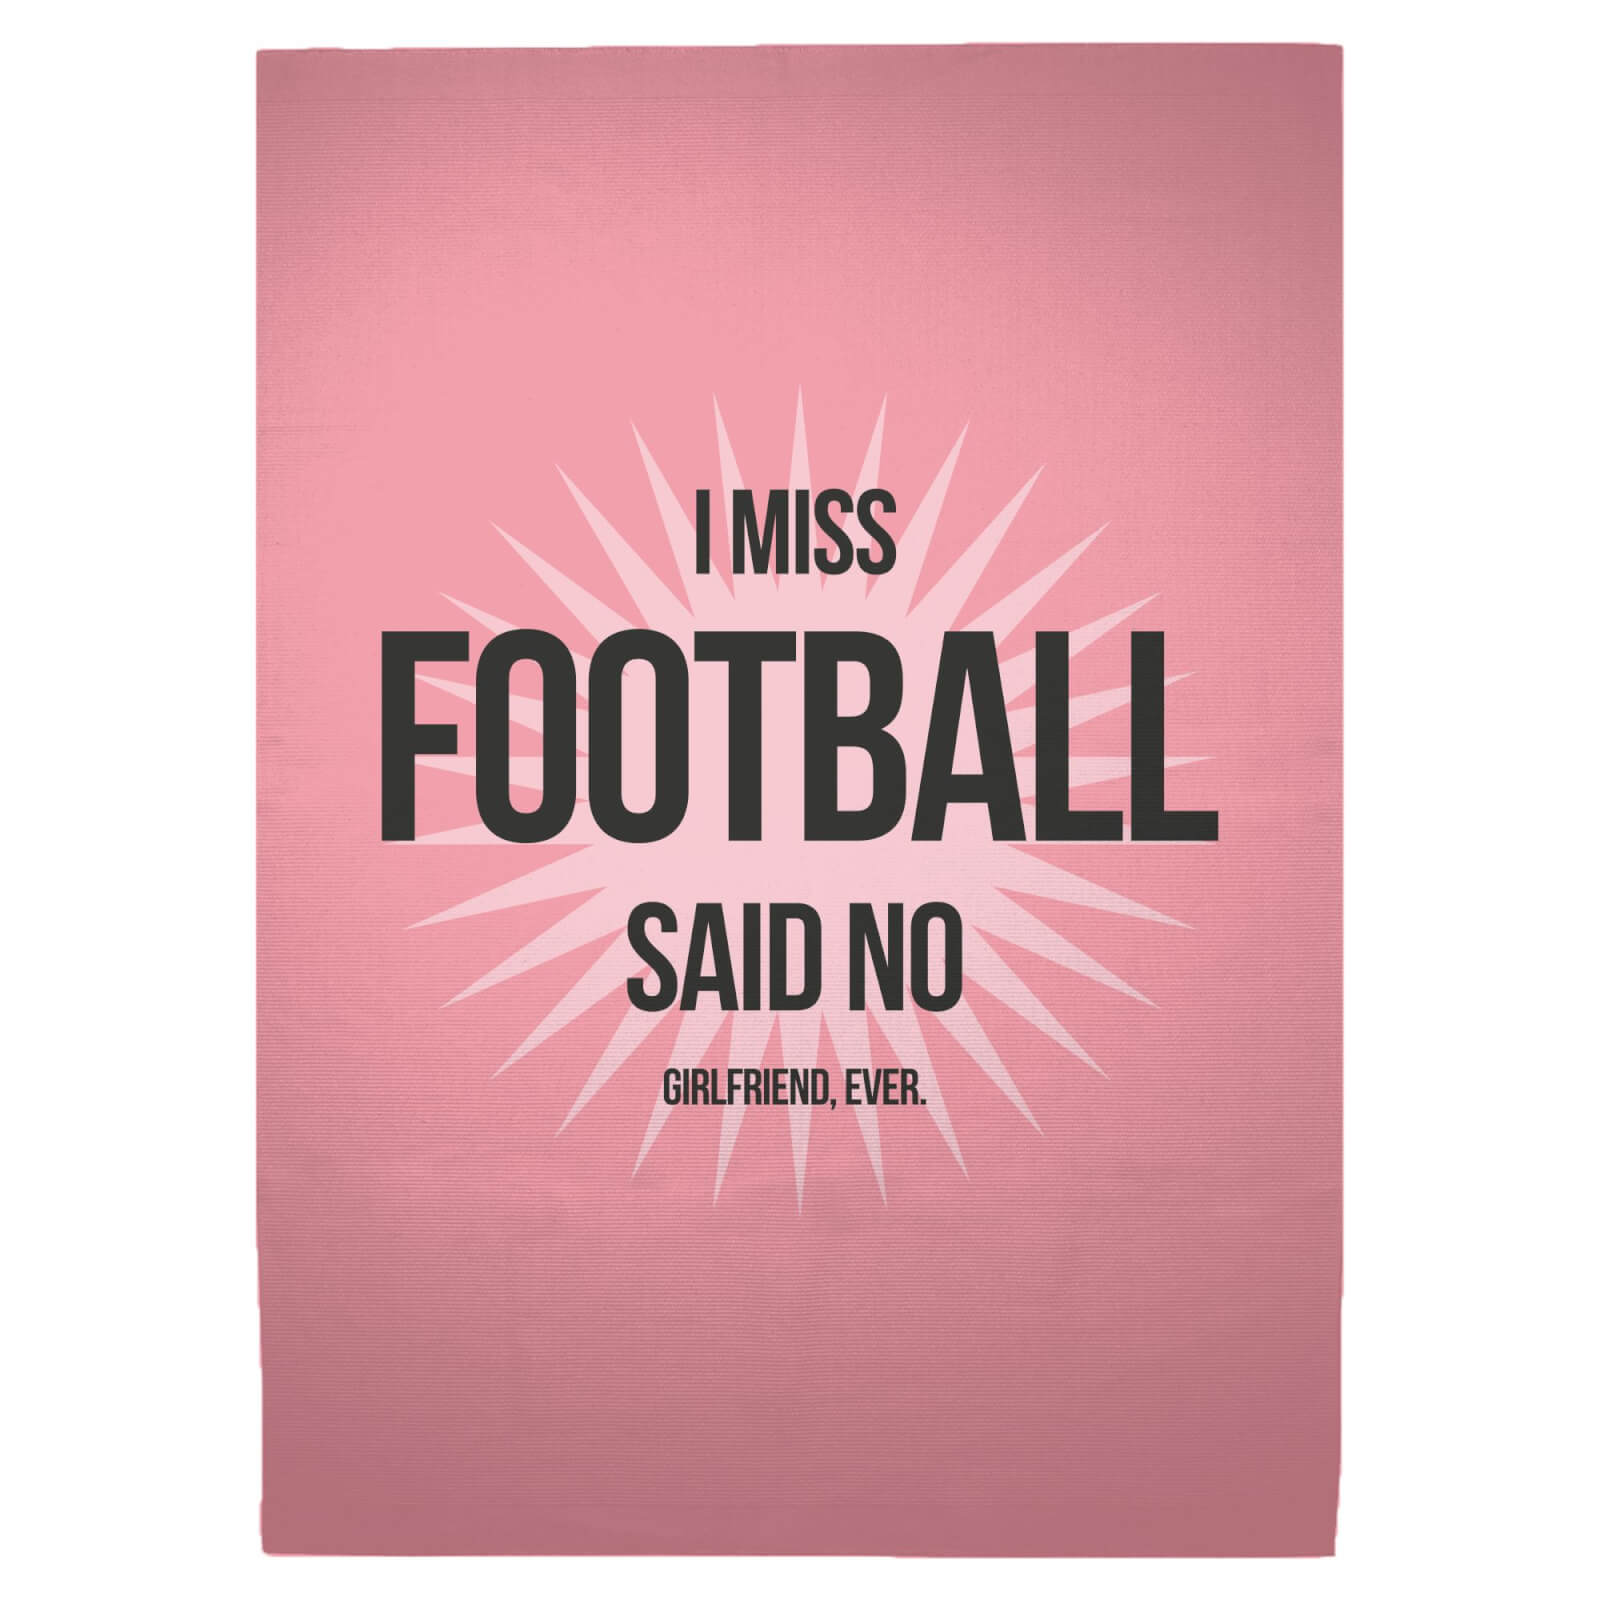 I Miss Football Woven Rug - Large